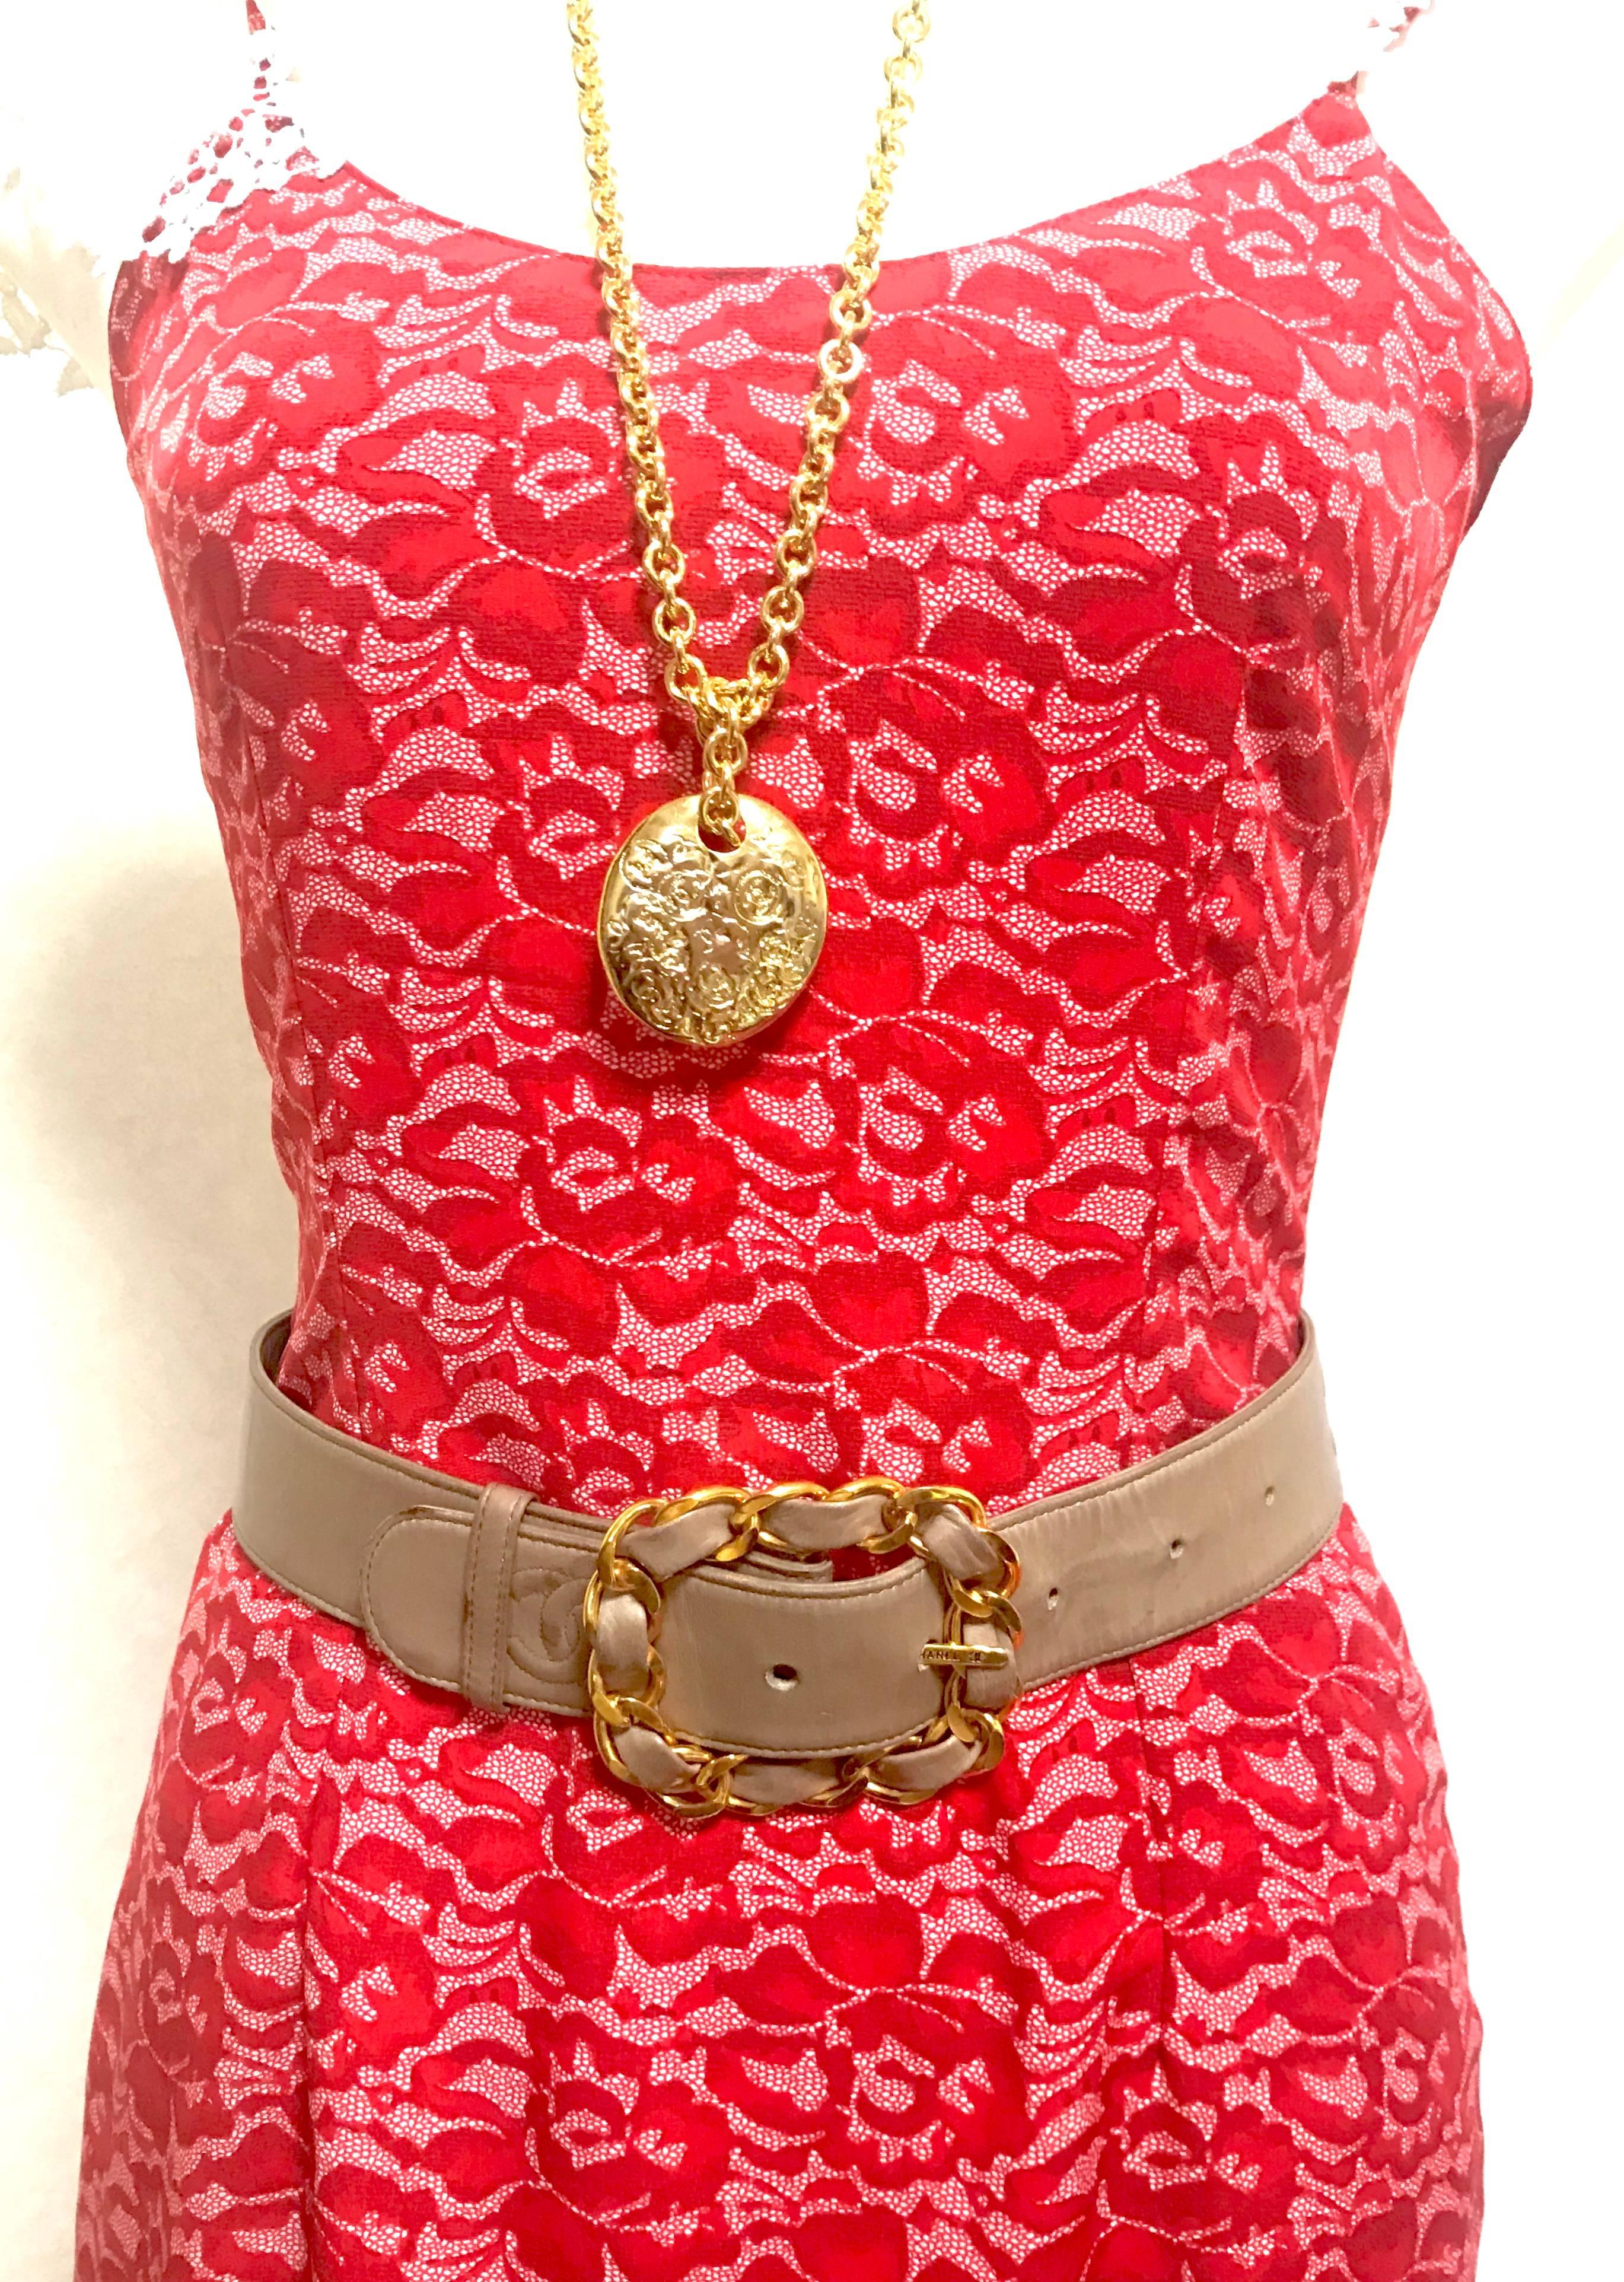 1990s. Vintage CHANEL taupe, cocoa brown color thick leather belt with gold tone chain buckle and CC stitch marks. Size for 24.5